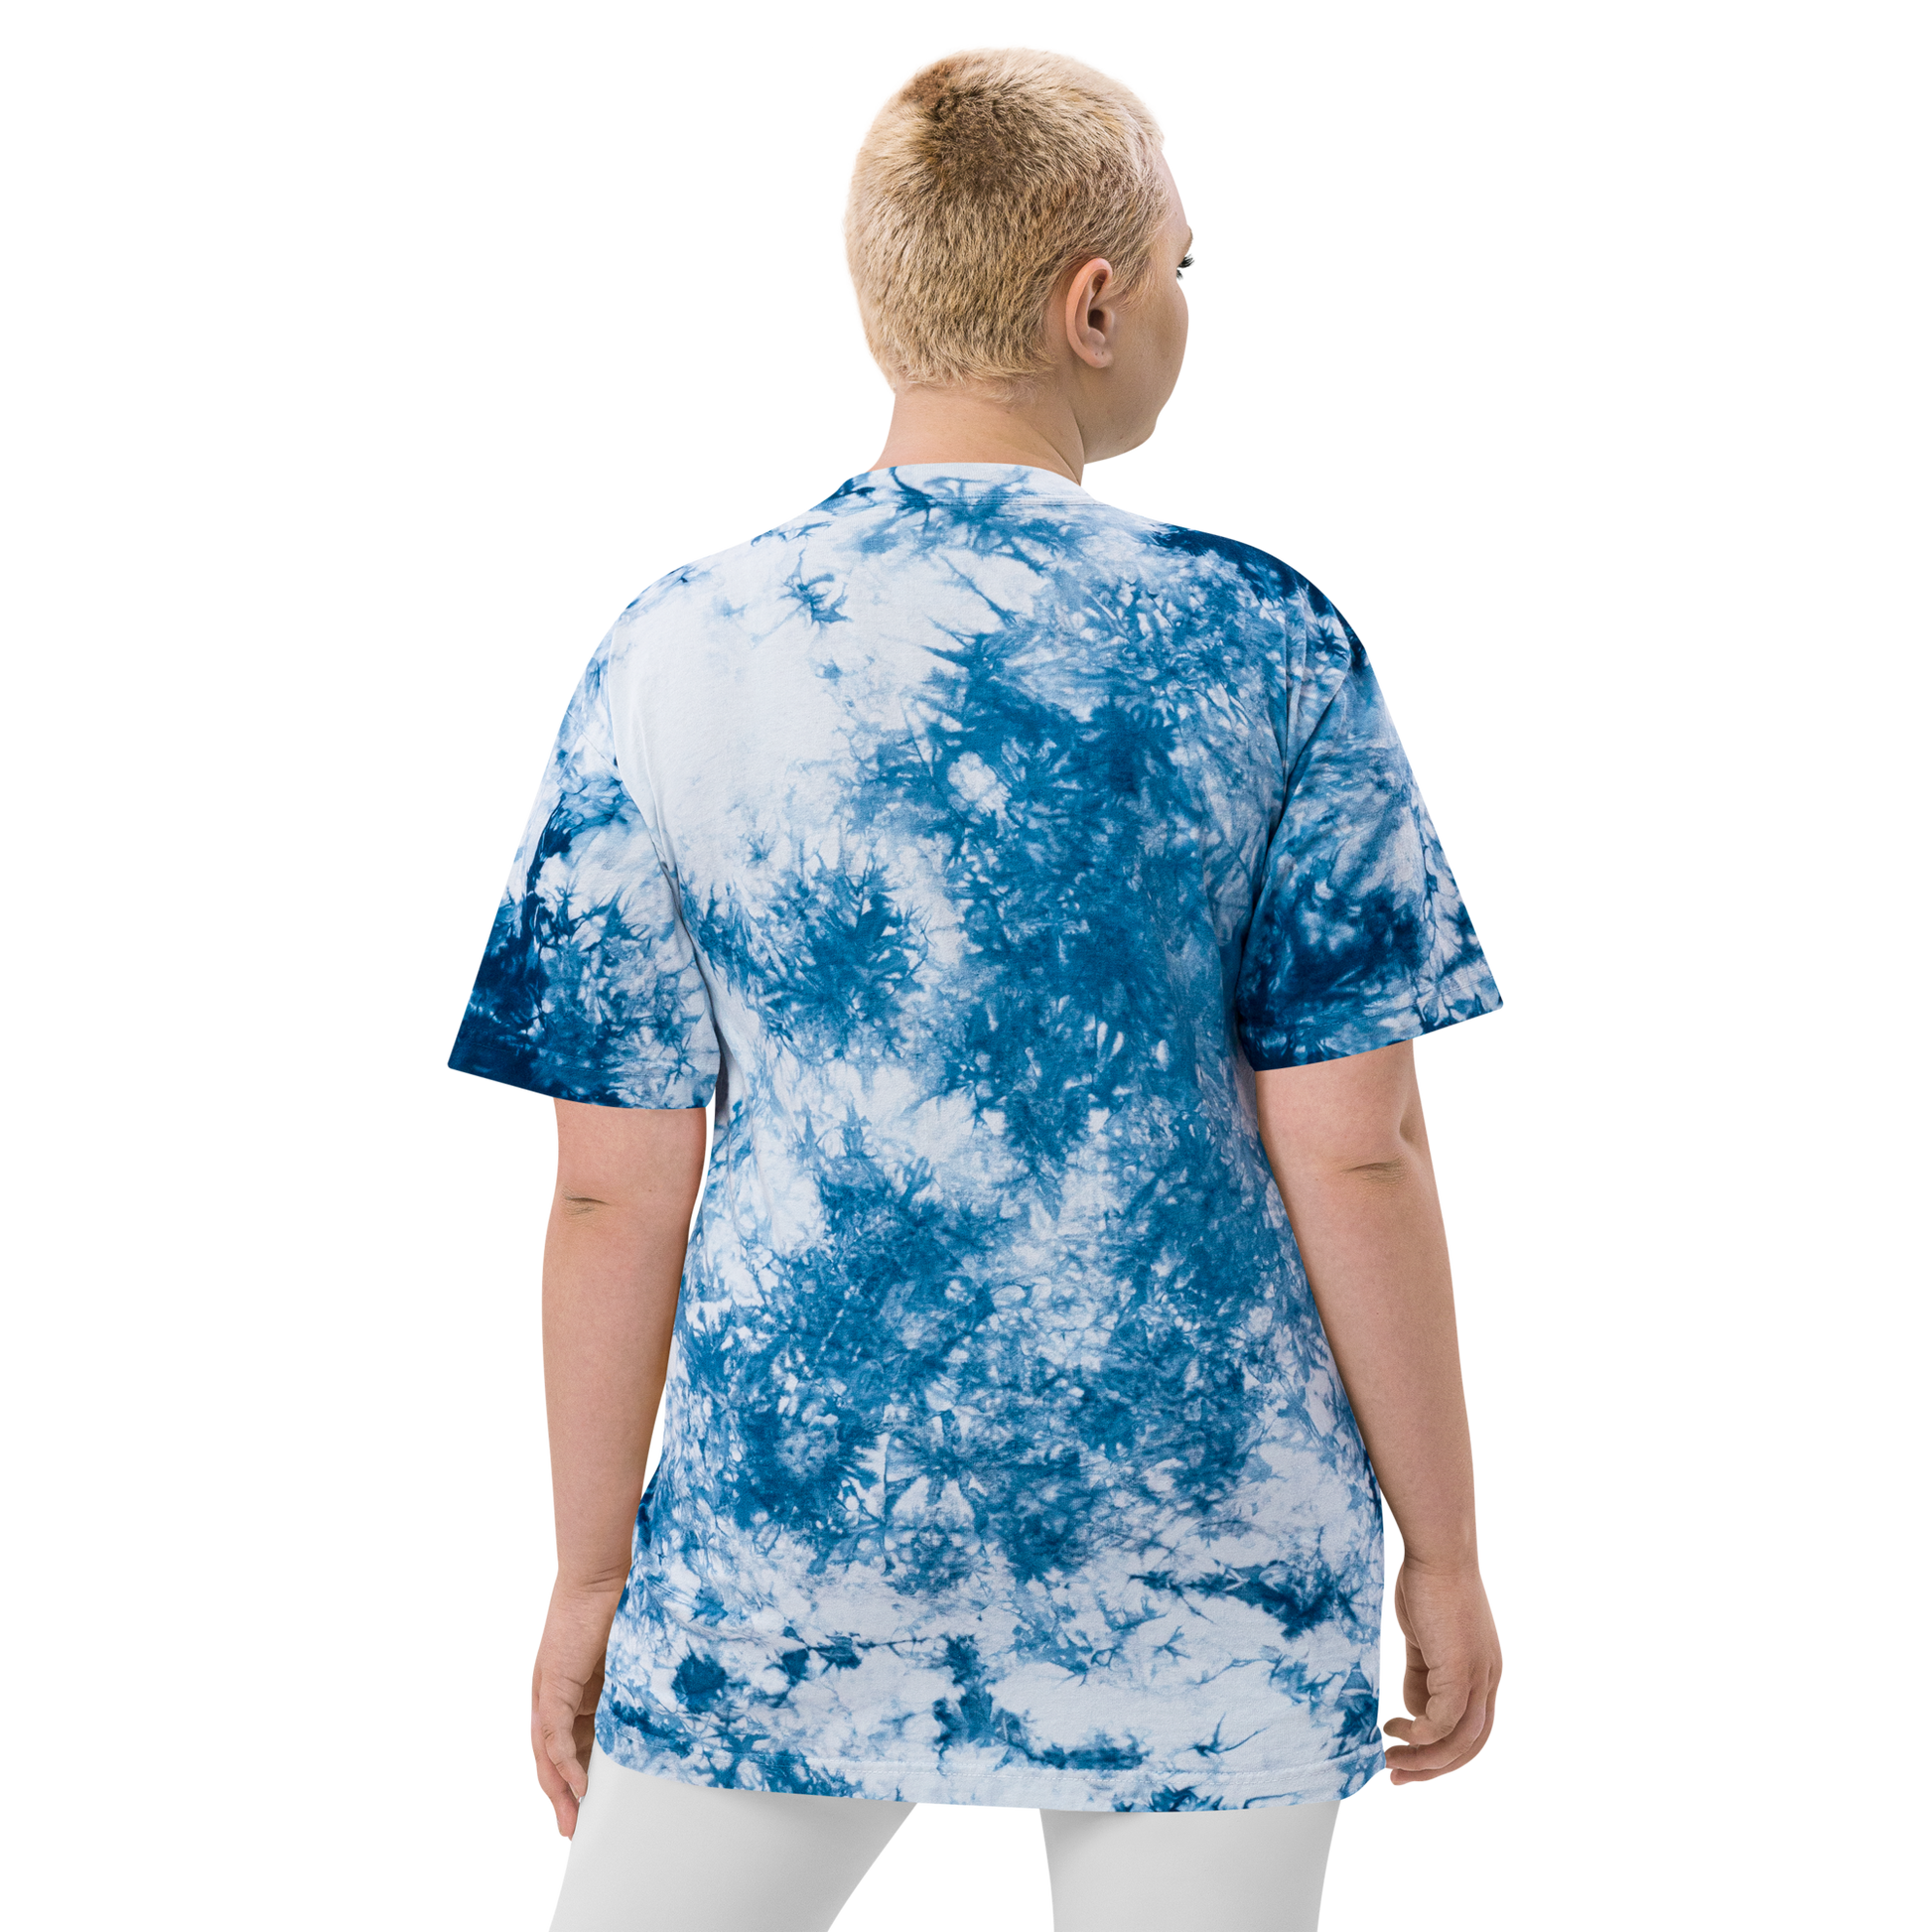 YHM Designs - YQT Thunder Bay Oversized Tie-Dye T-Shirt - Crossed-X Design with Airport Code and Vintage Propliner - White Embroidery - Image 09